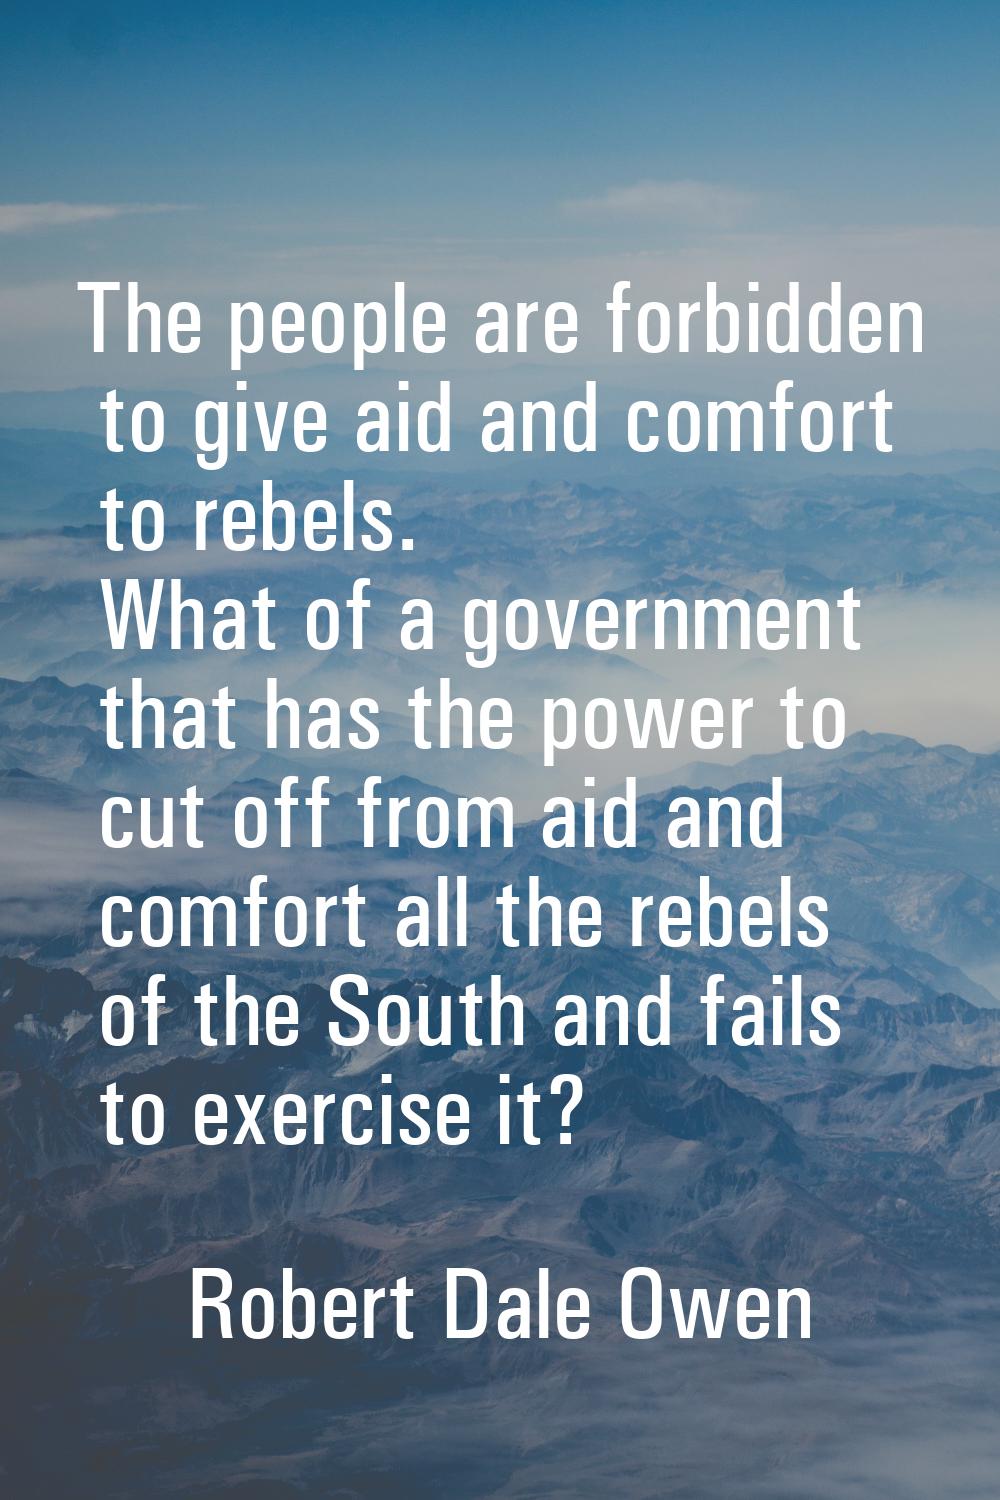 The people are forbidden to give aid and comfort to rebels. What of a government that has the power